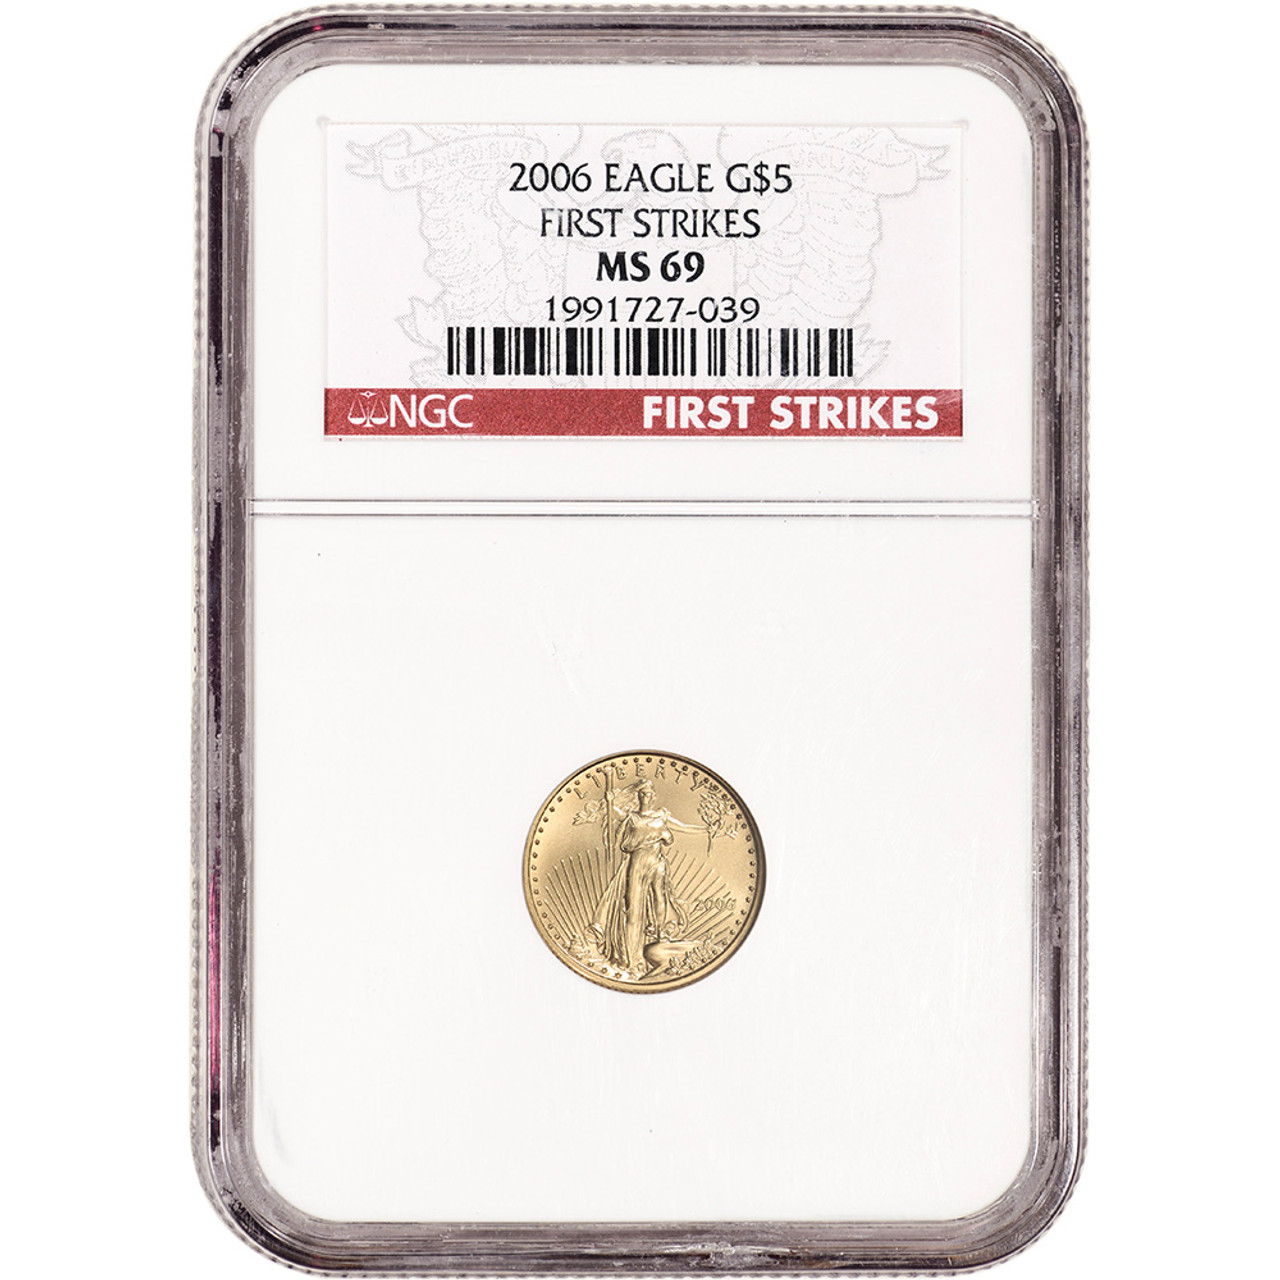 2006 American Gold Eagle 1/10 oz $5 - NGC MS69 First Strikes [06